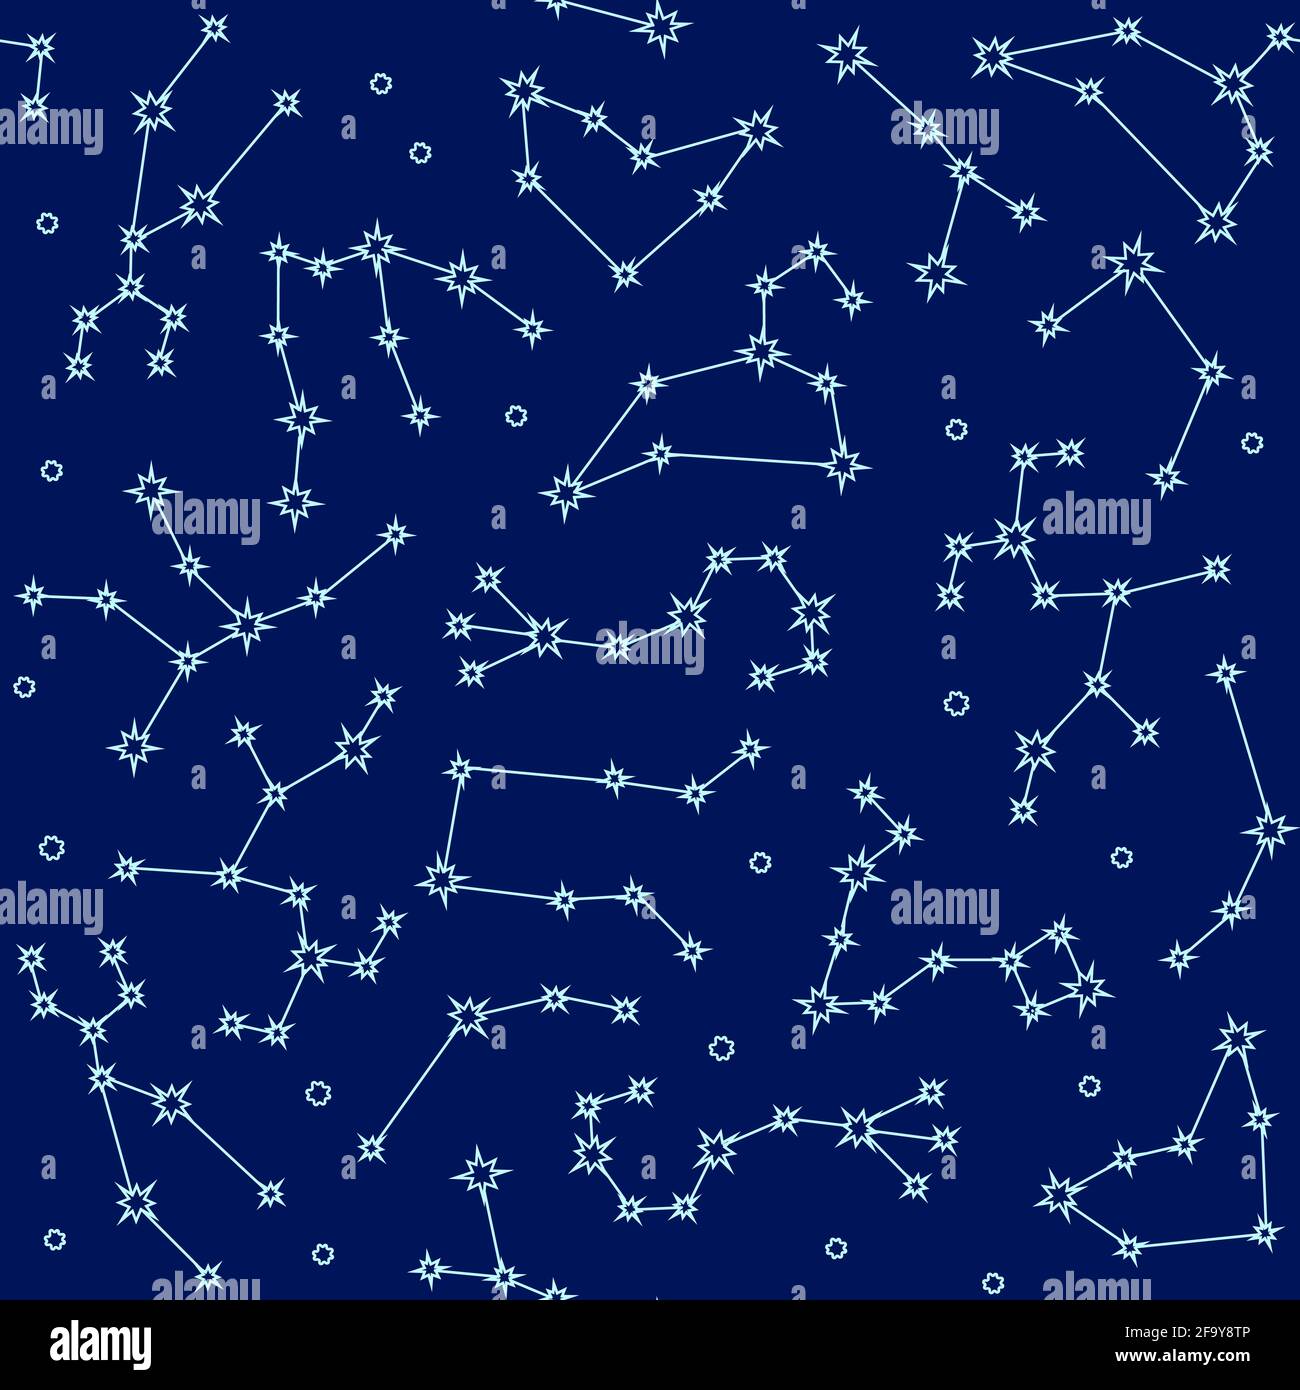 Astrology seamless background with zodiac constellation symbols. Cosmic repeating pattern with connected shining star signs. Vector illustration. Stock Vector